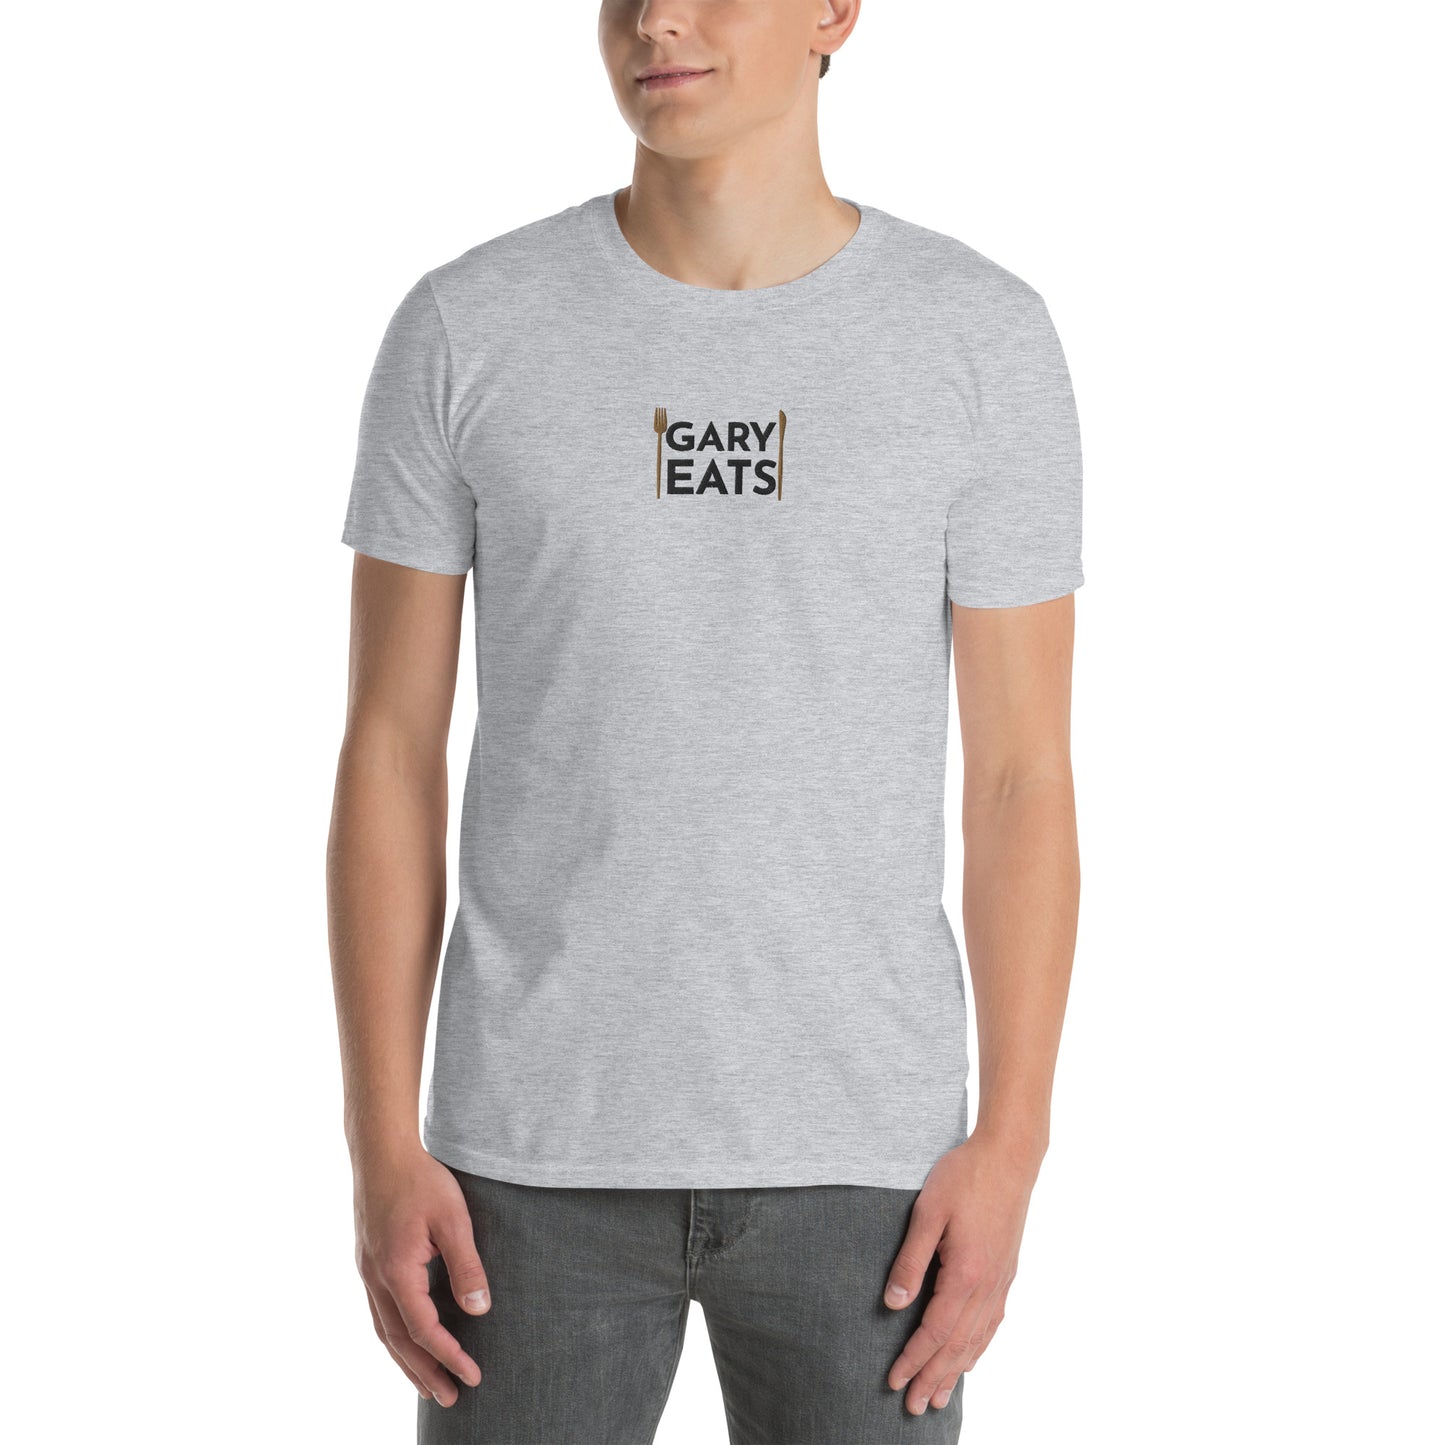 Gary Eats Embroidered Unisex T-Shirt